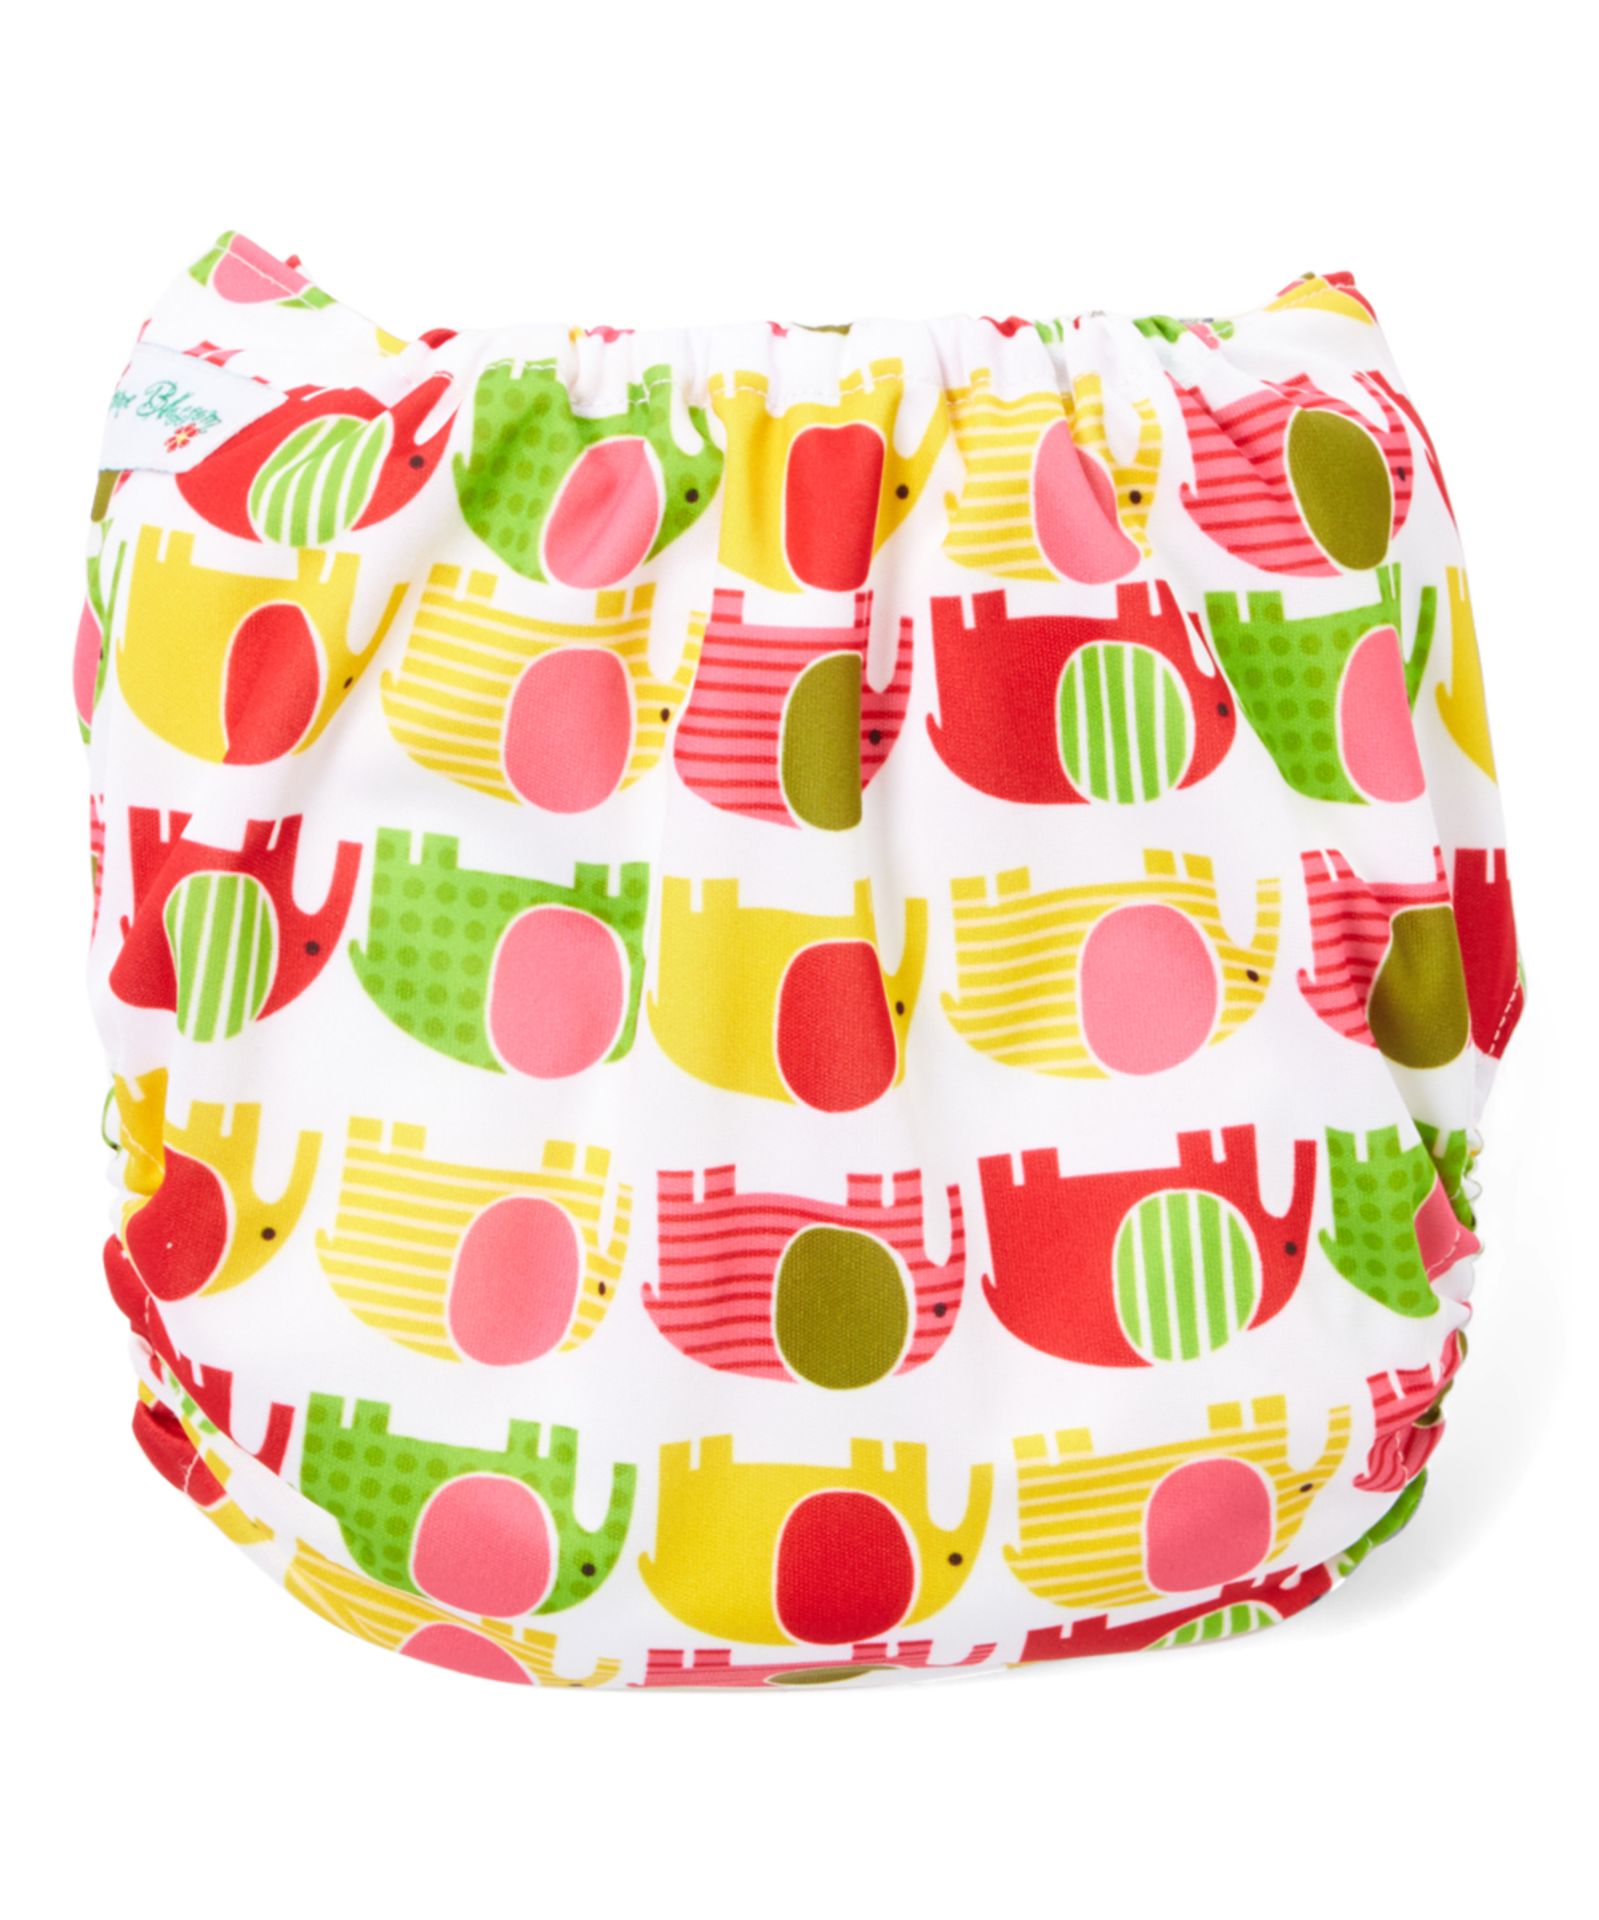 Red & Yellow Elephants Cloth Diaper - Image 2 of 2